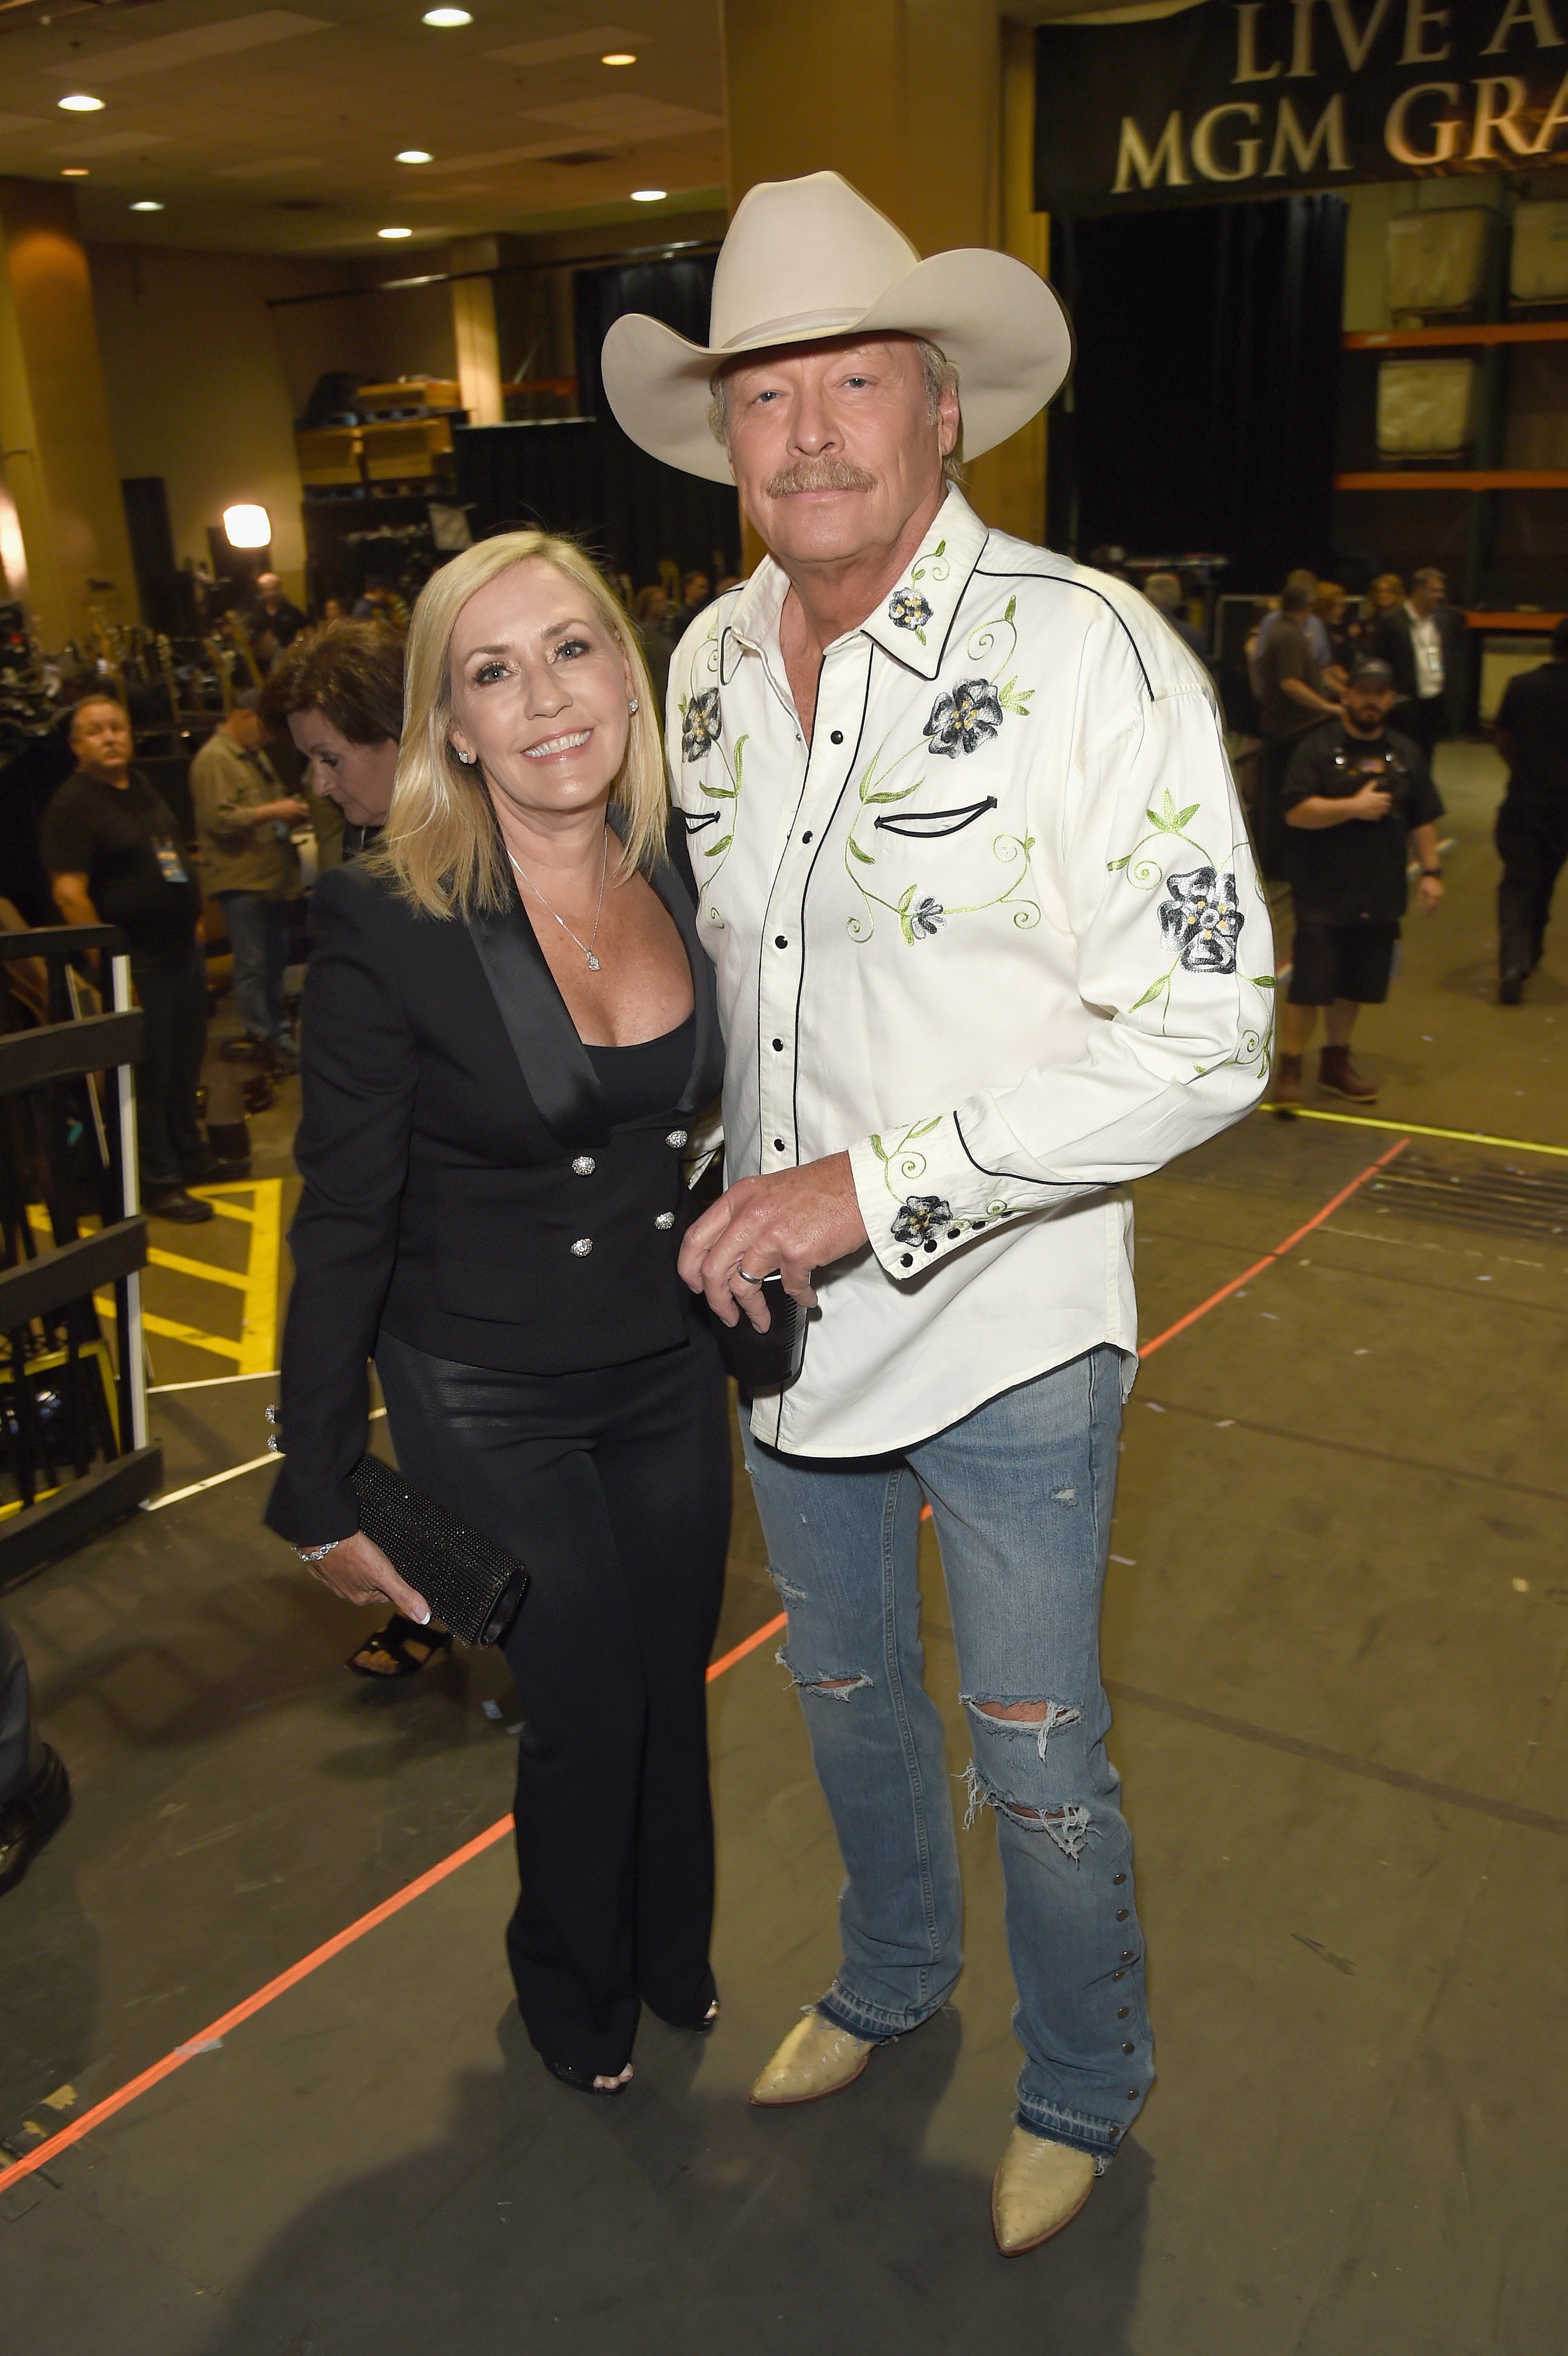 Denise Jackson (L) and Alan Jackson attend the 53rd Academy of Country Music Awards at MGM Grand Garden Arena on April 15, 2018 in Las Vegas, Nevada. | Source: Getty Images